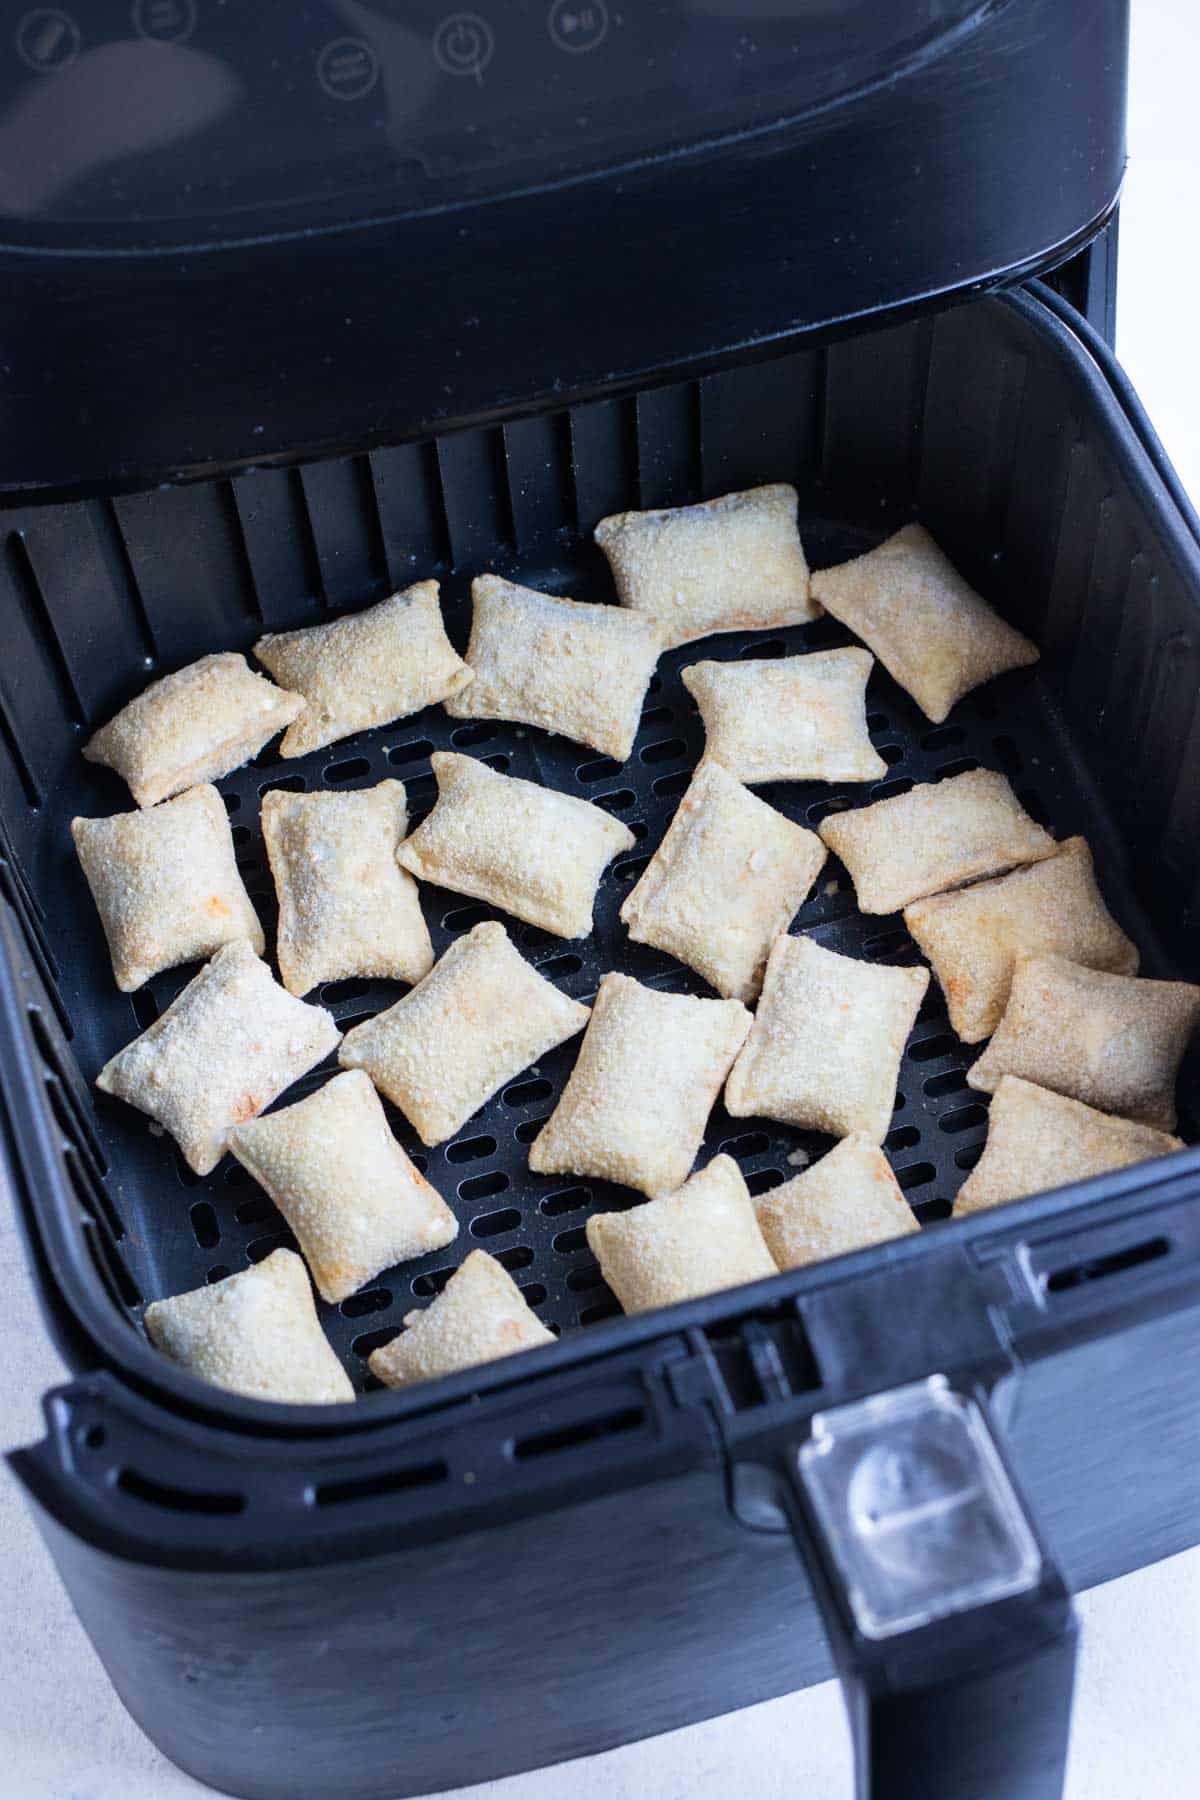 Uncooked pizza rolls are in an air fryer.